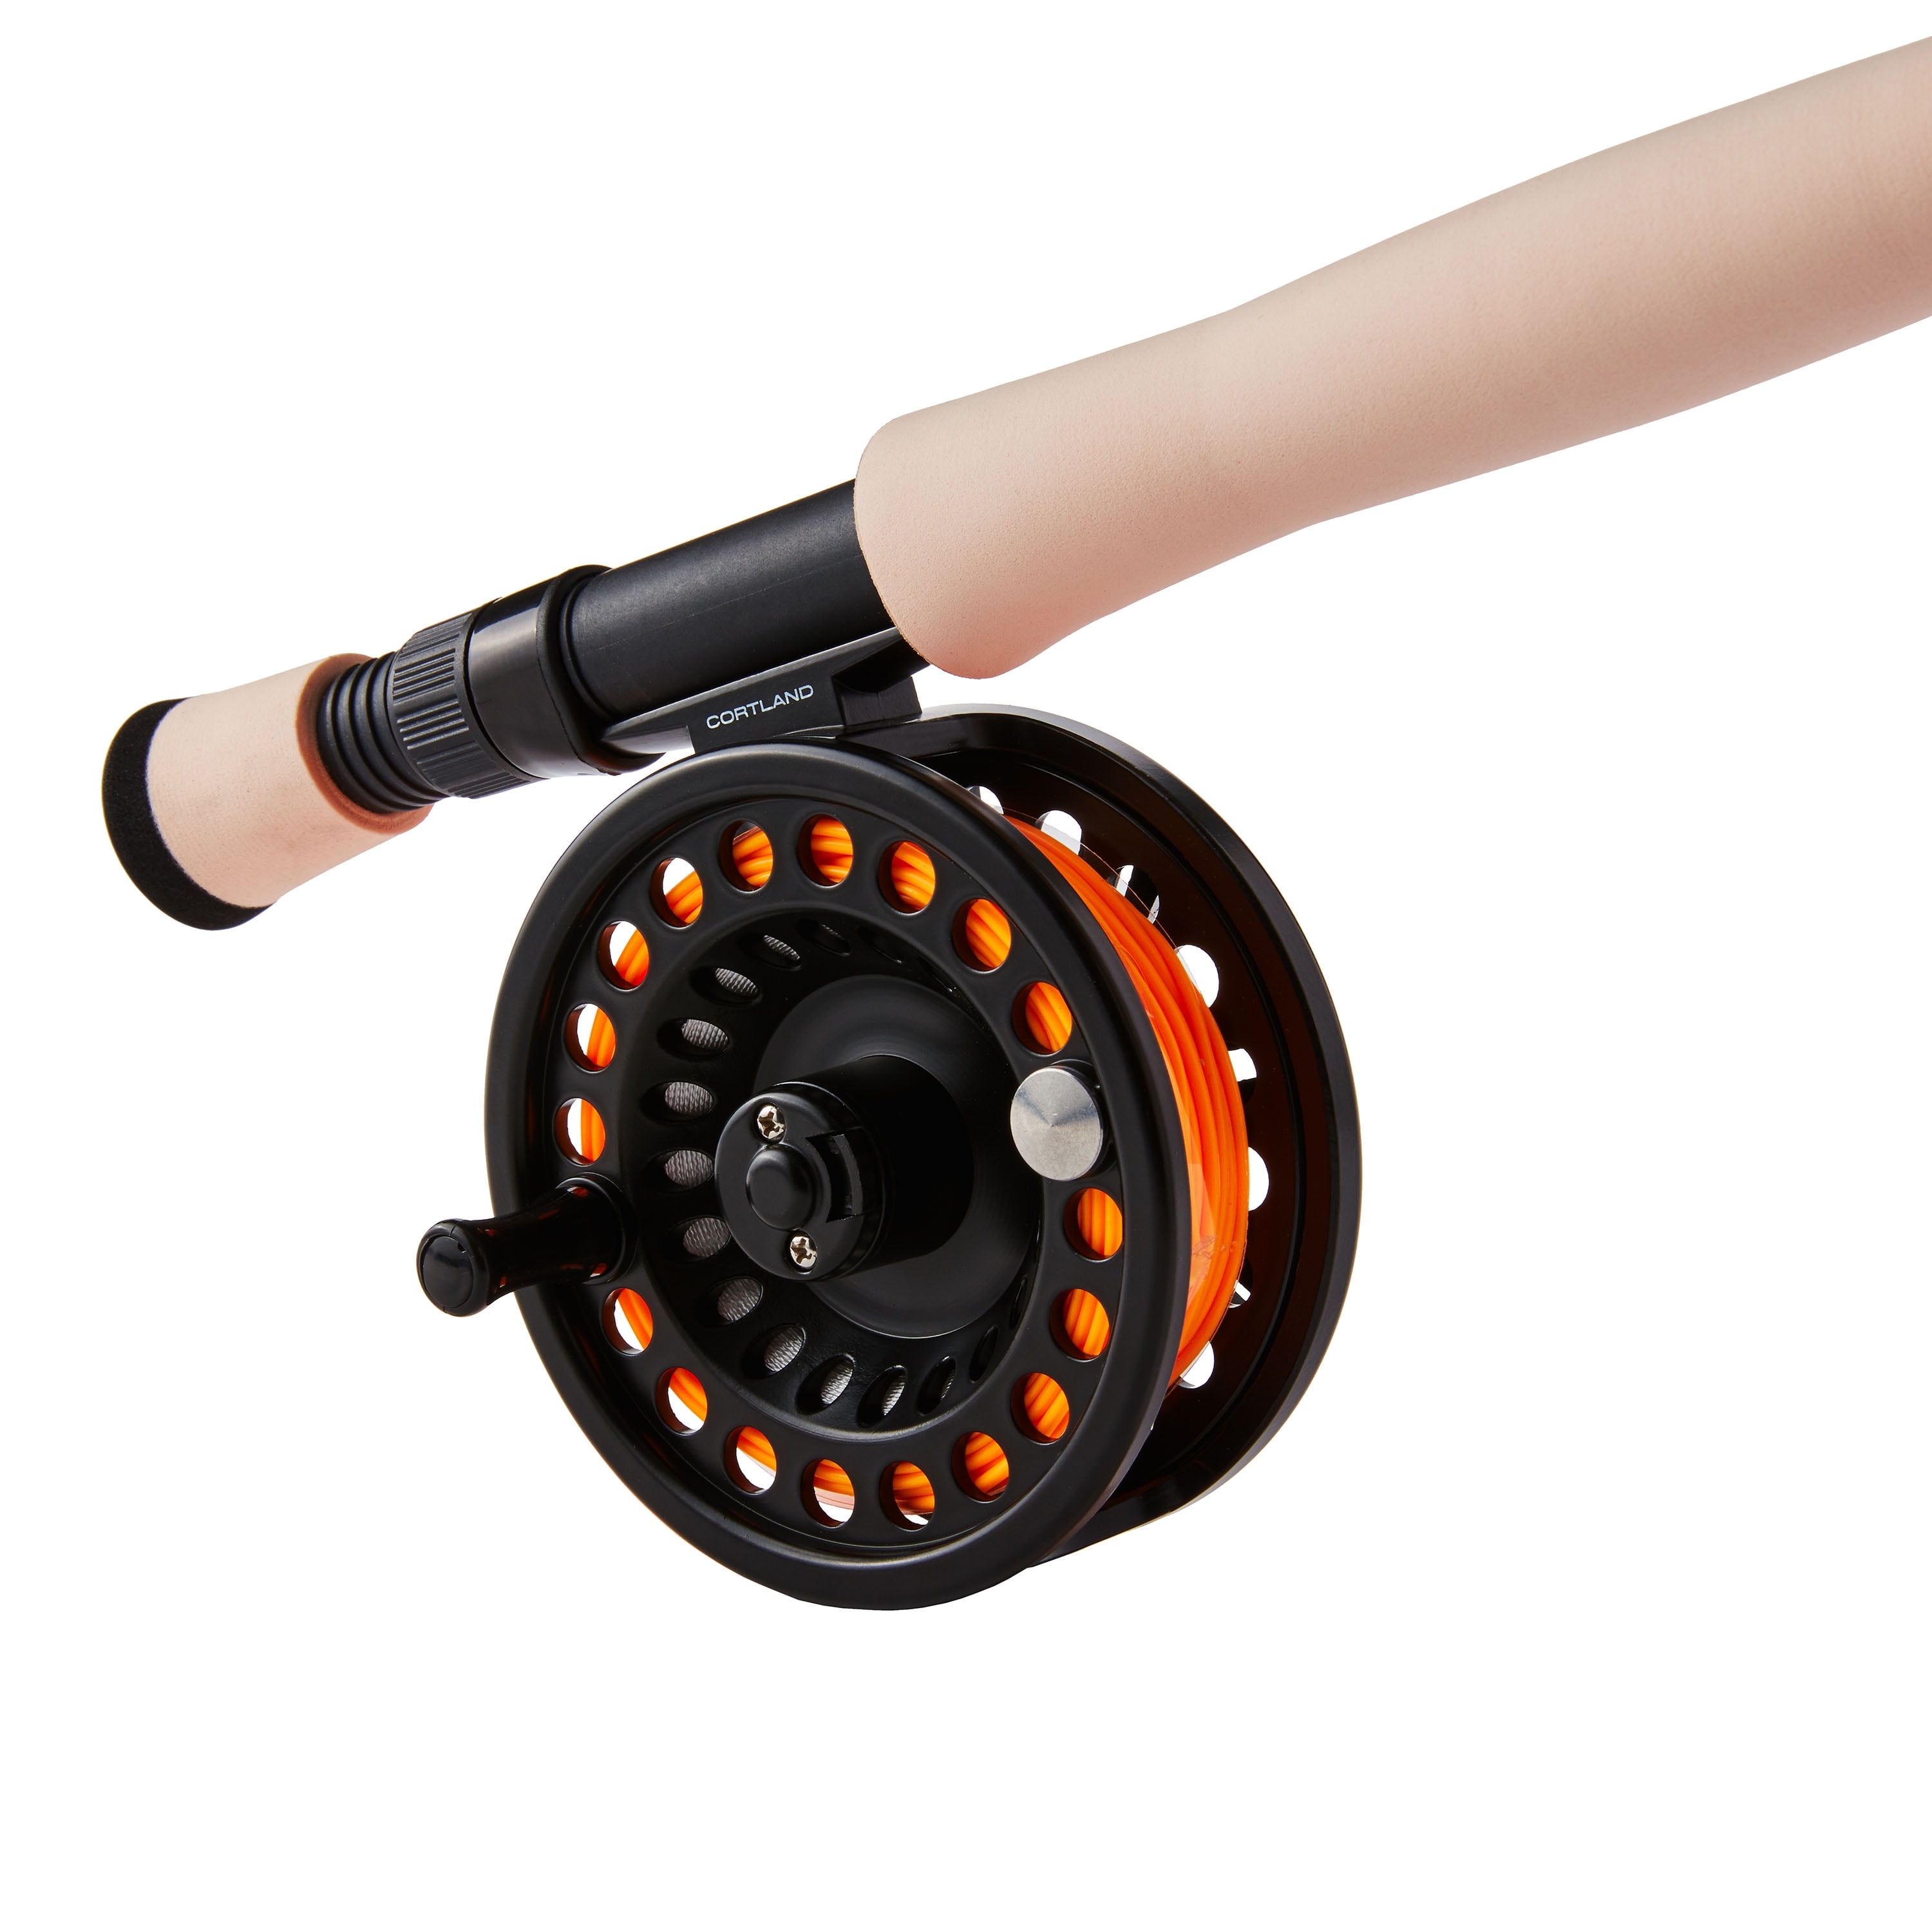 Cortland Endurance Cassette Fly Reel - The Fly Shack Fly Fishing